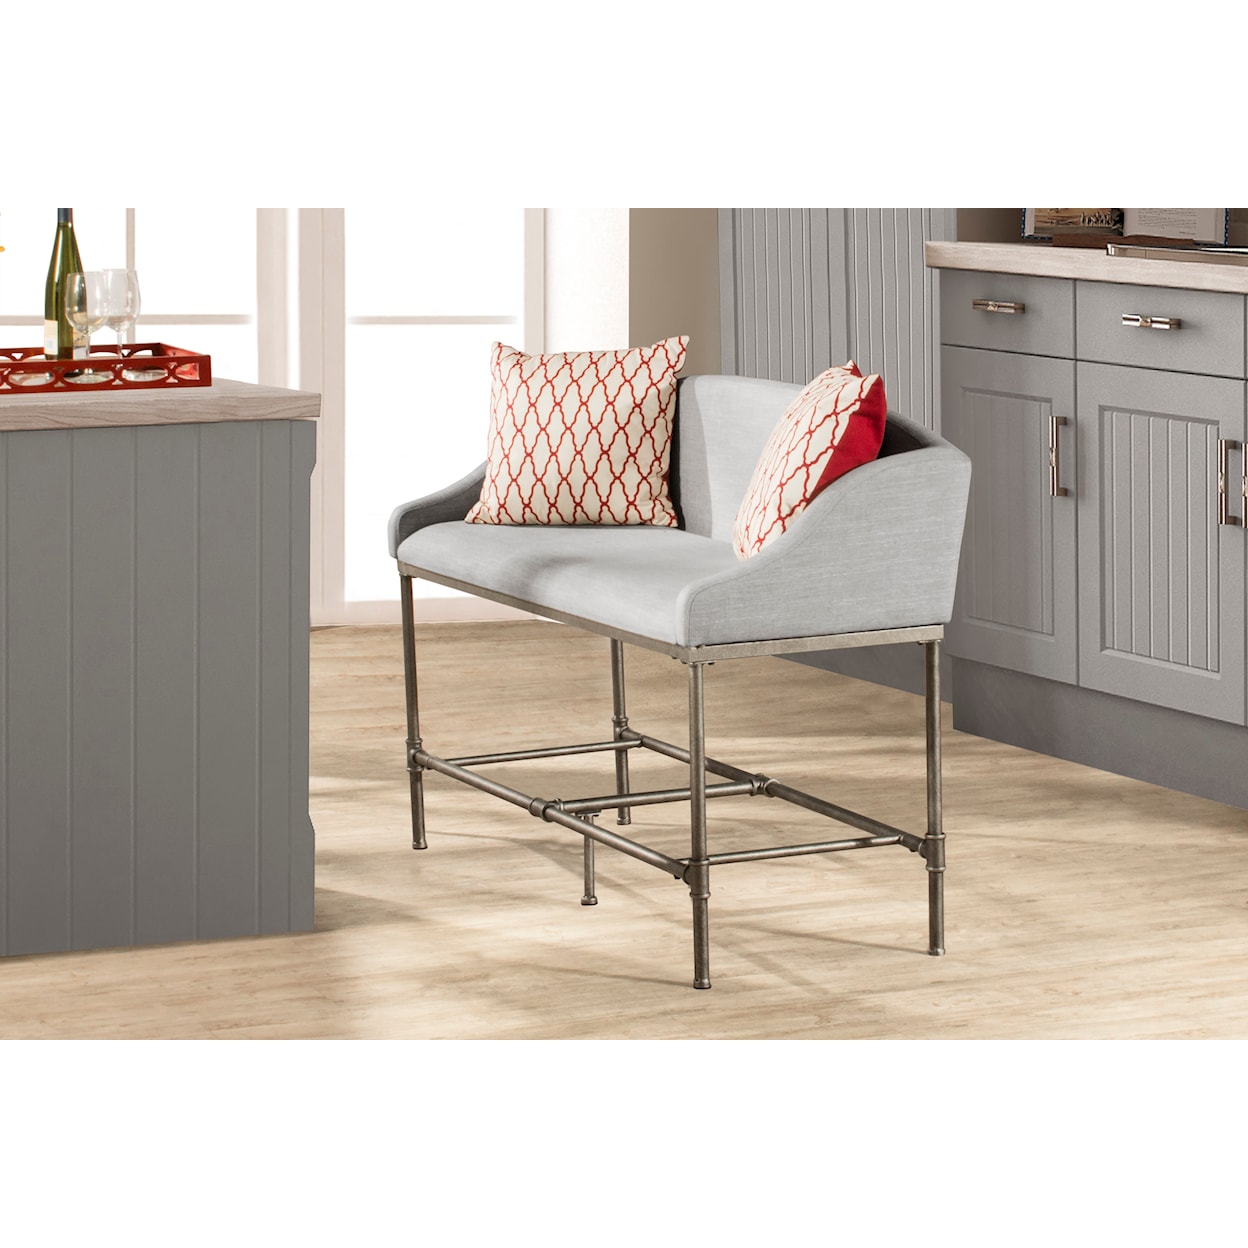 Hillsdale Dillon Dining Bench